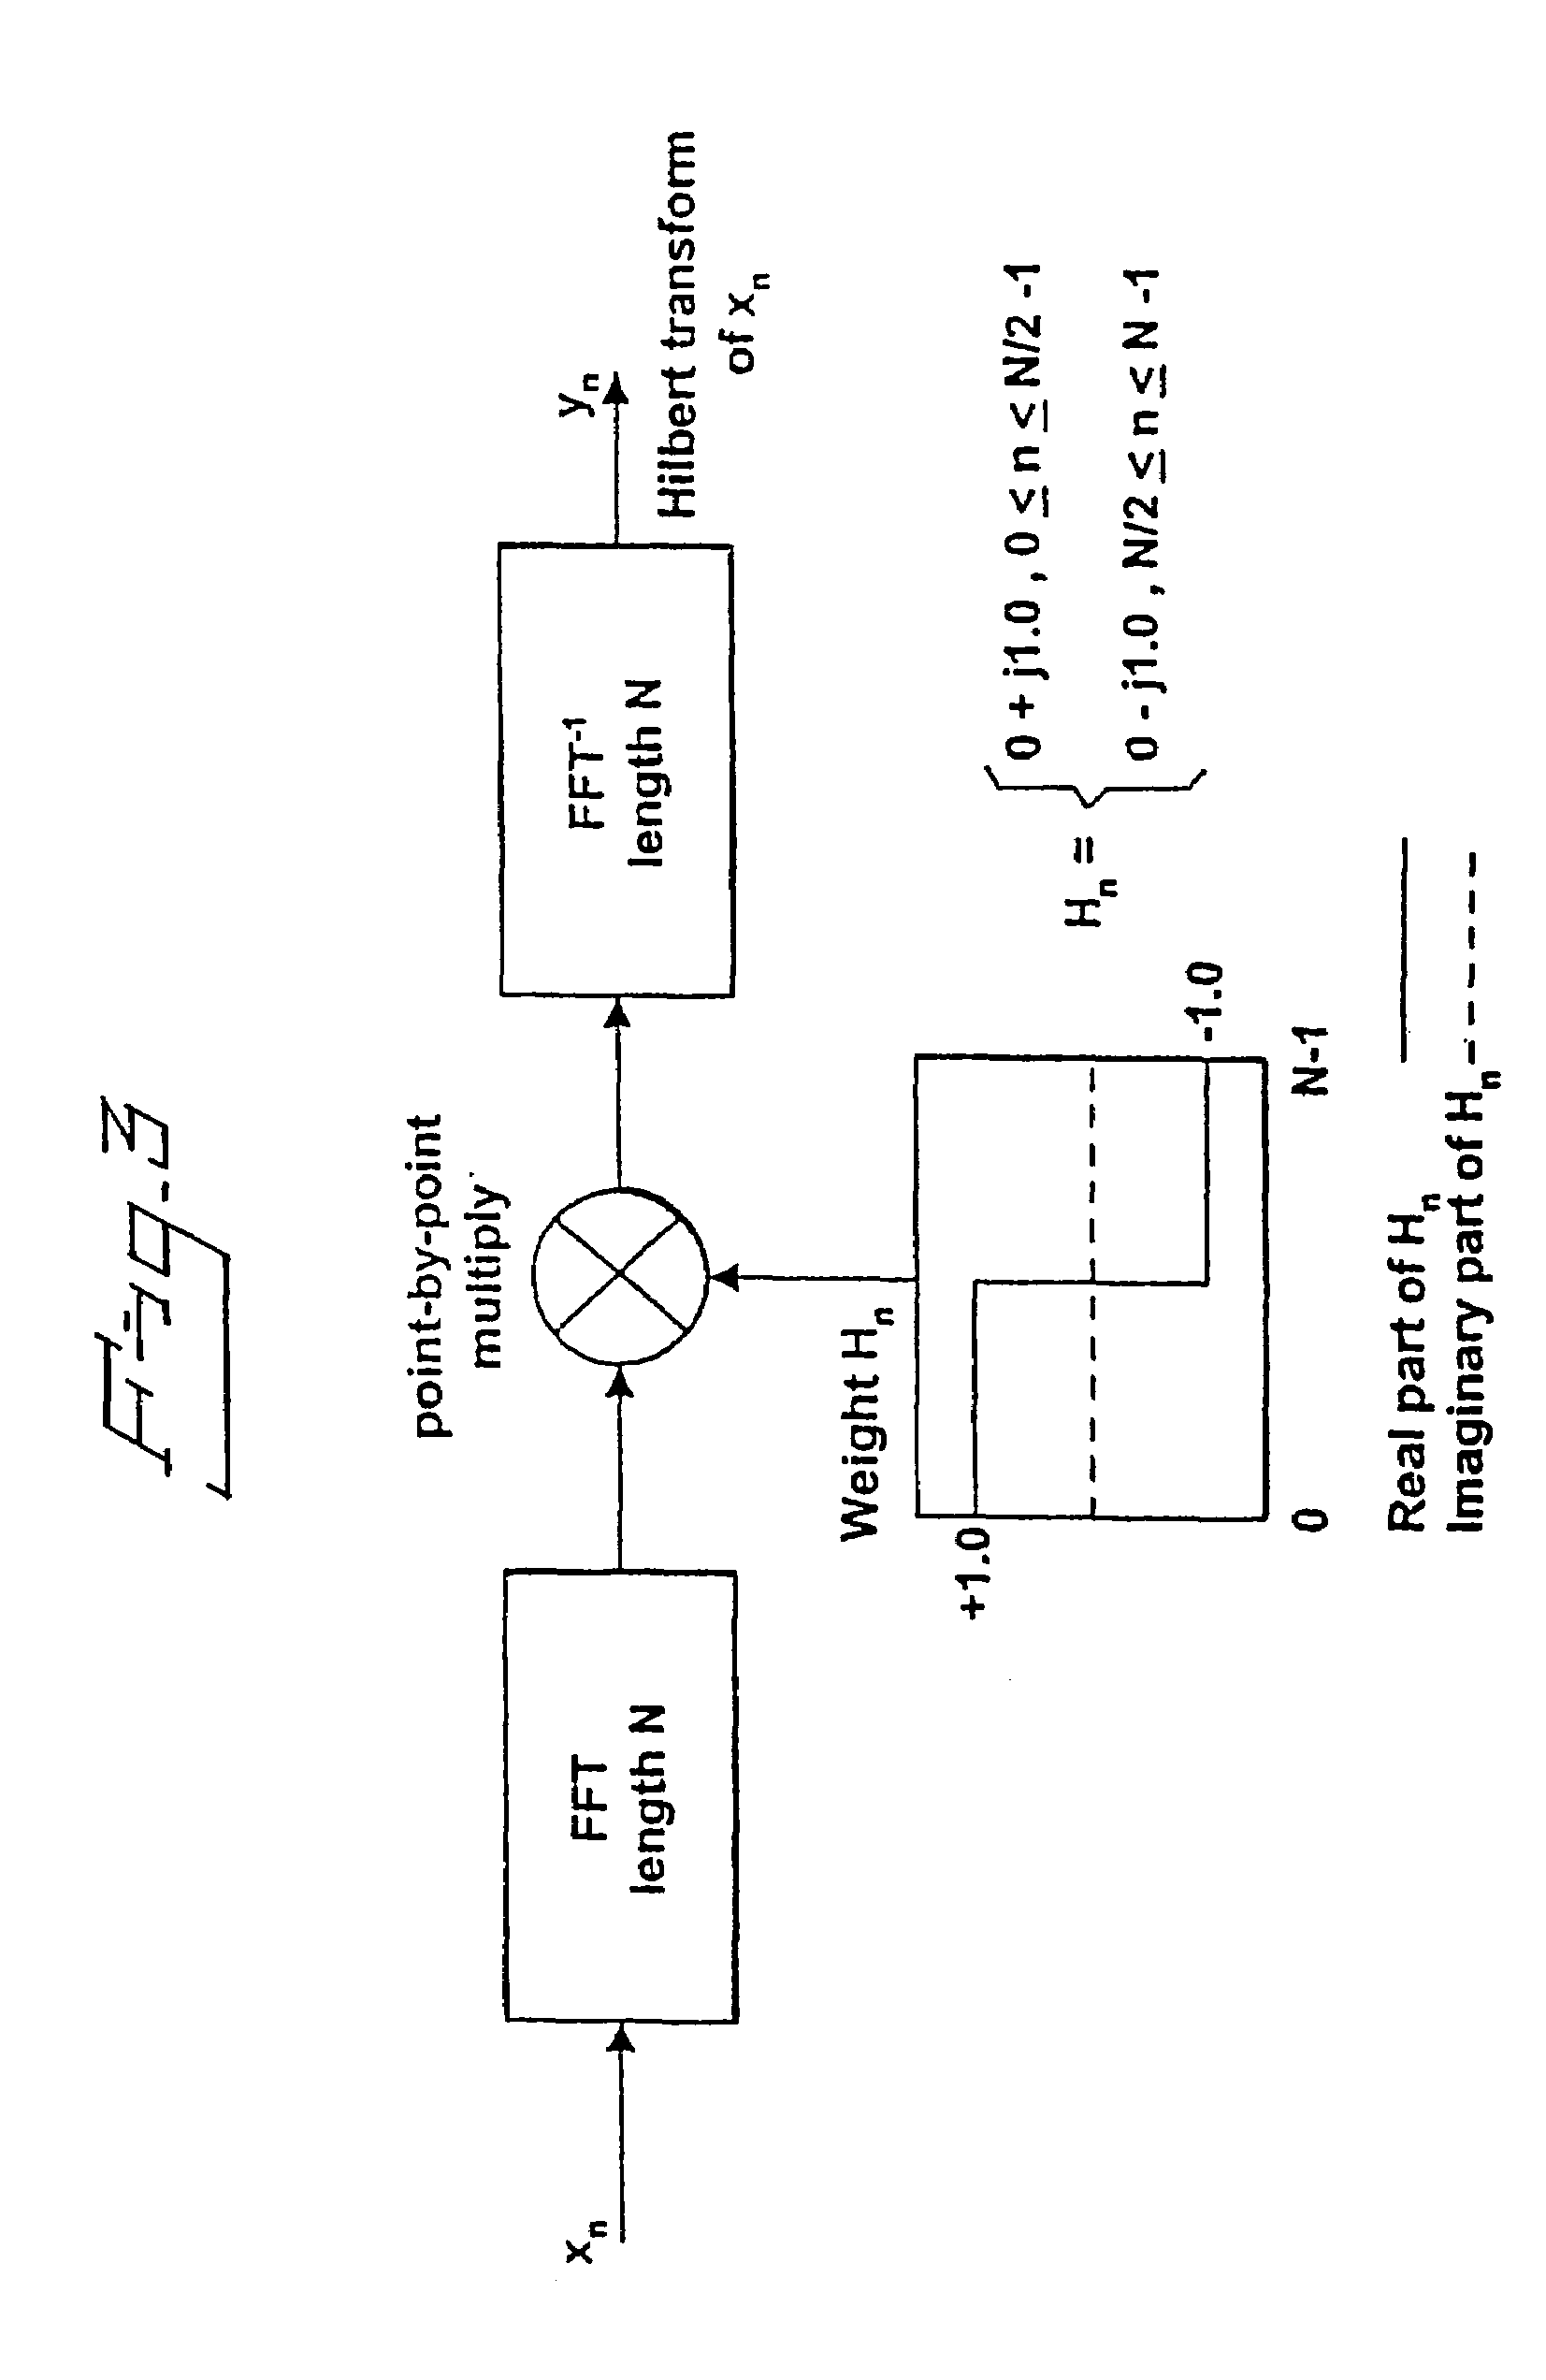 Device and method for determining a cardiac condition using a complex signal formed from a detected cardiac signal